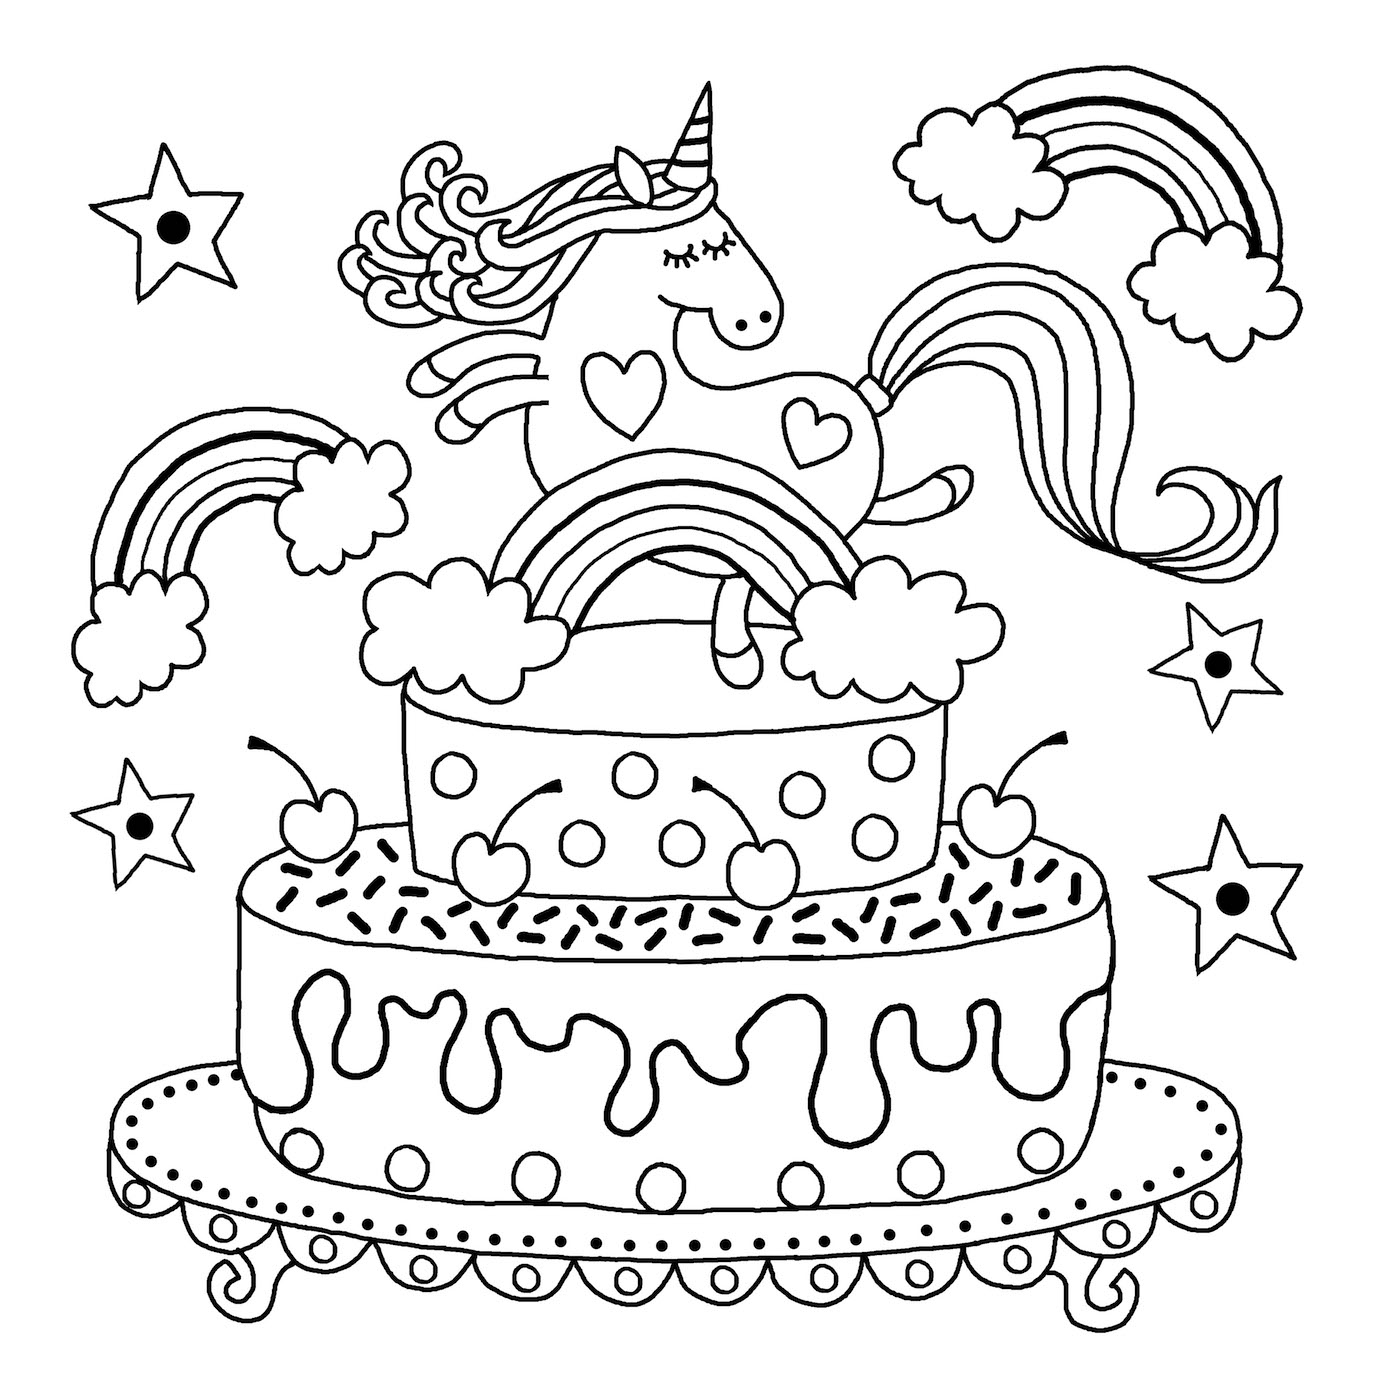 Free Printable Unicorn Colouring Pages For Kids Buster Children s Books